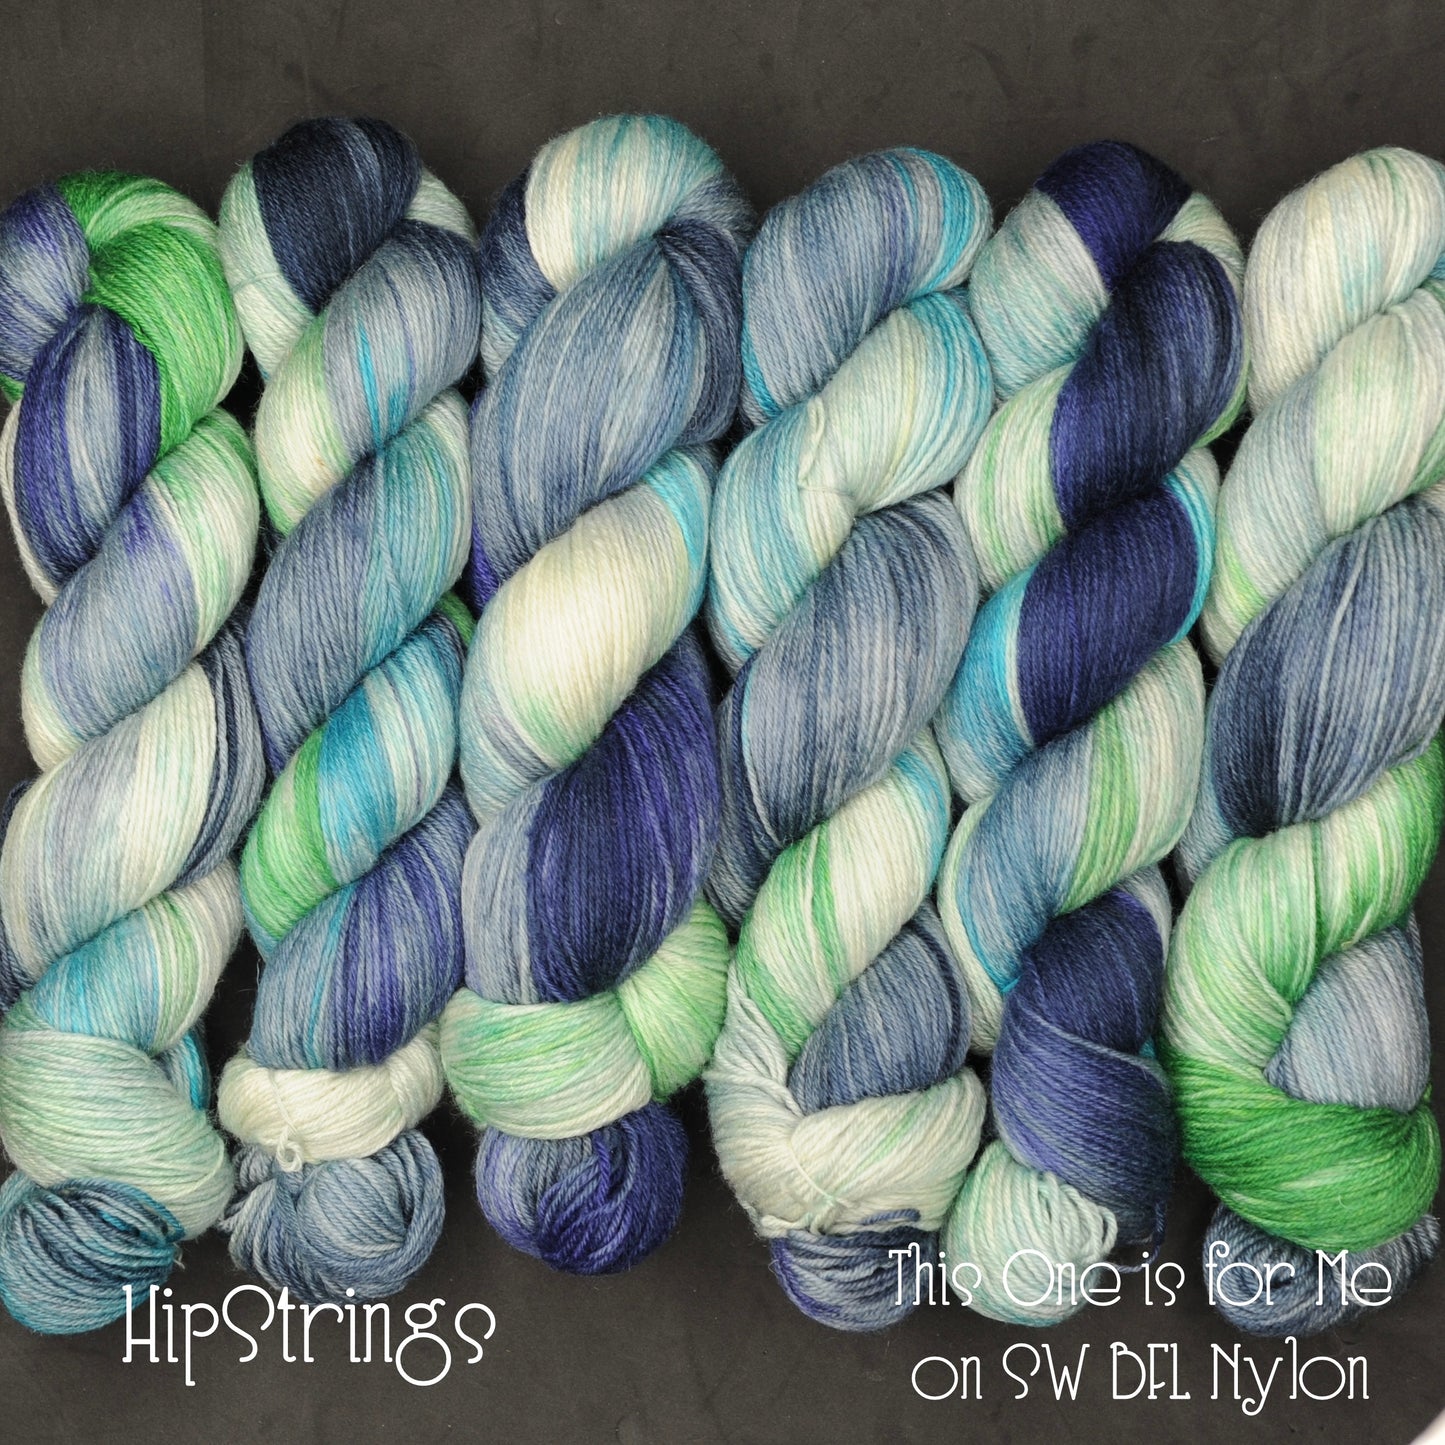 This One is For Me on Extra Credit SW BFL Nylon Sock yarn - 437 yd/100g